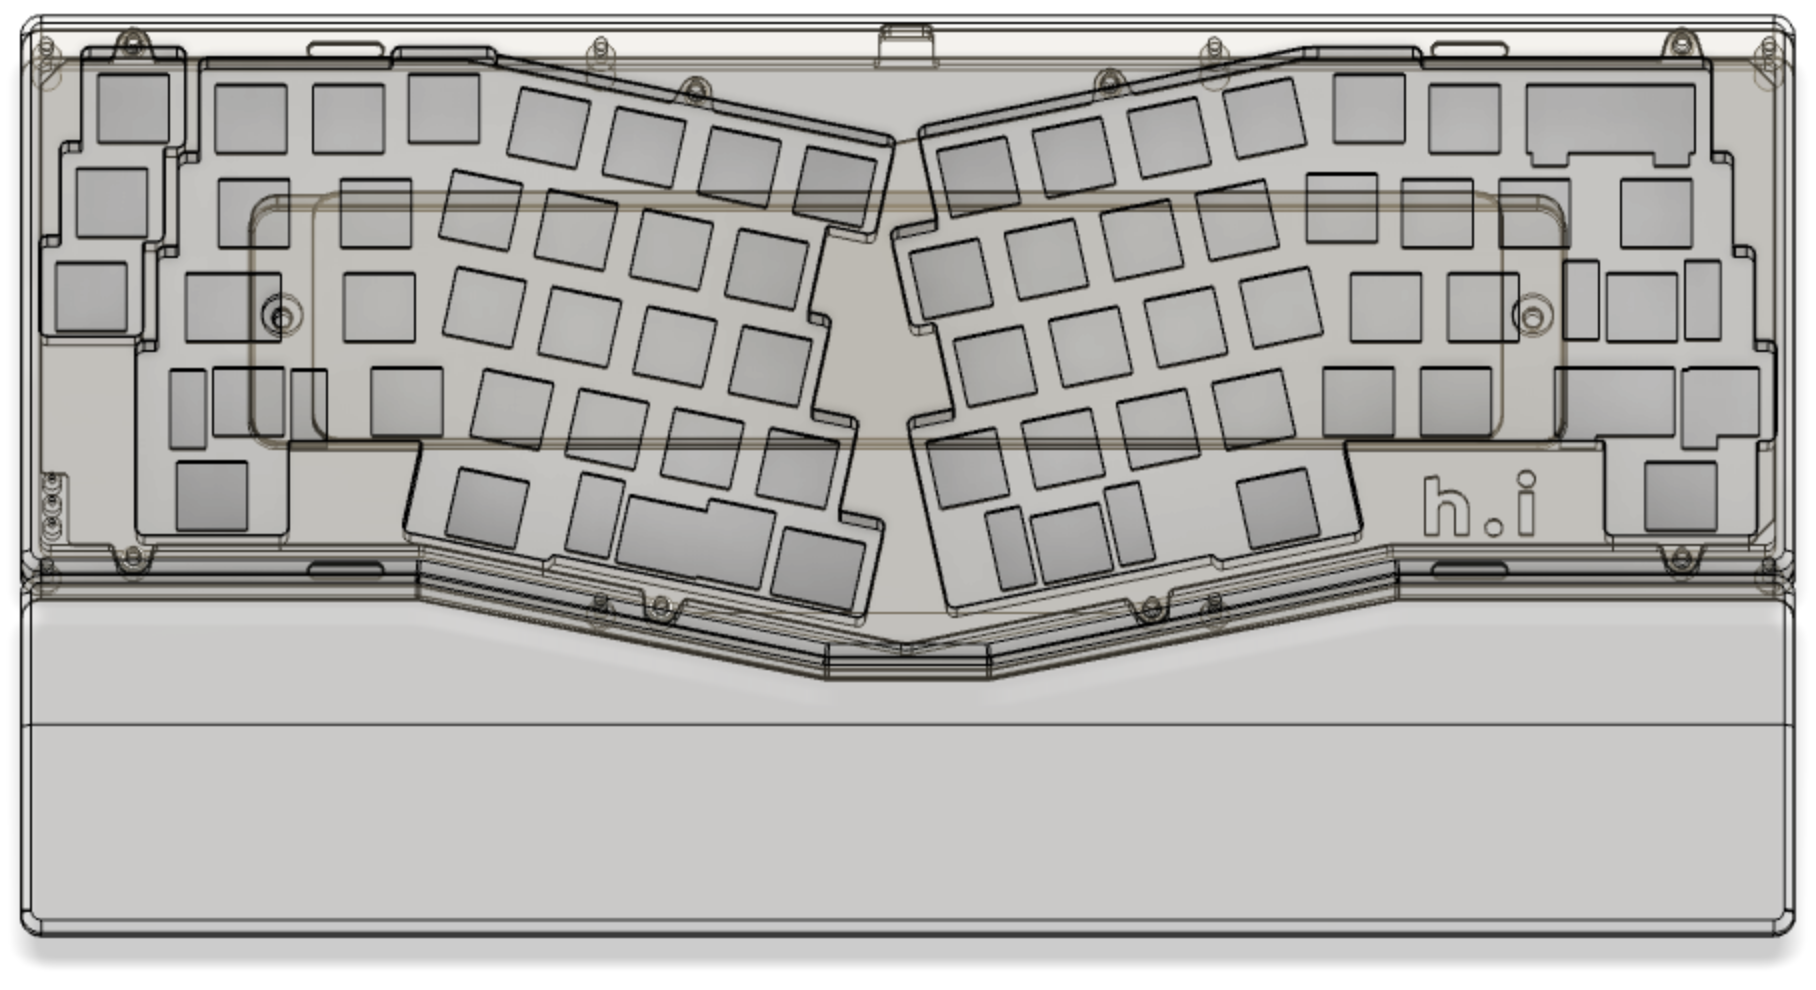 Wireframe screenshot of a Case and Wrist Rest